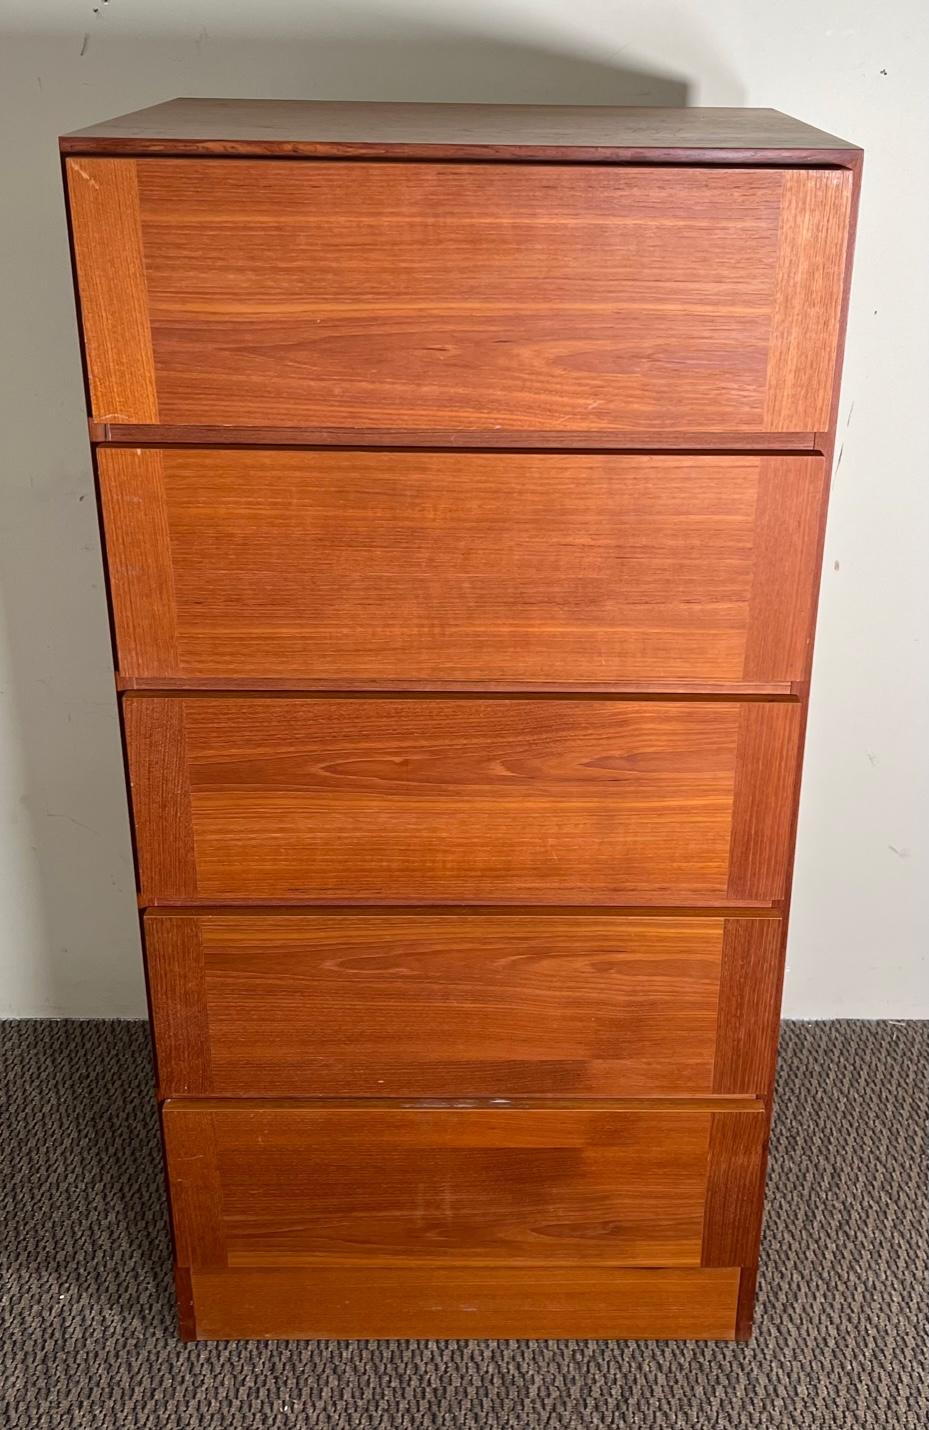 This is a teak tall boy dresser with 5 drawers by Vinde Mobelfabrik. Made in Denmark. Original stamp at the back. Very nice condition with minimal wear. Small chip on one side at the bottom. Some scratches on the top. Some small marks and stains